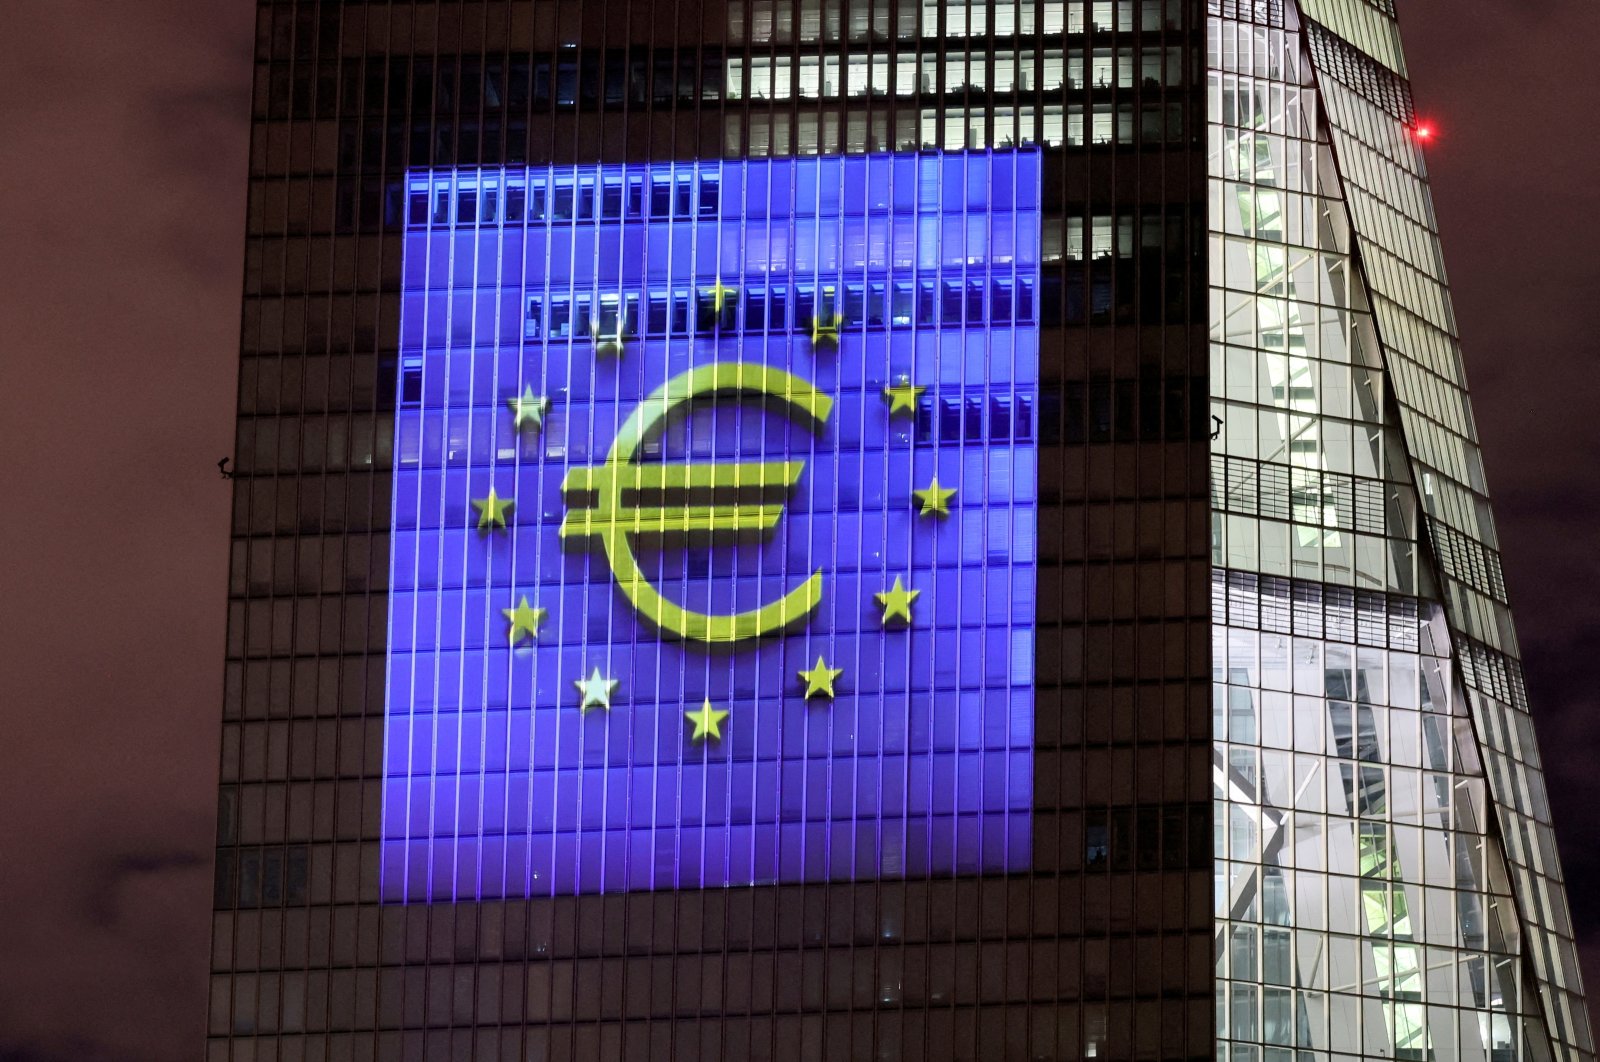 A symphony of light consisting of bars, lines and circles in blue and yellow, the colors of the European Union, illuminates the south facade of the European Central Bank (ECB) headquarters in Frankfurt, Germany, Dec. 30, 2021. (Reuters Photo)